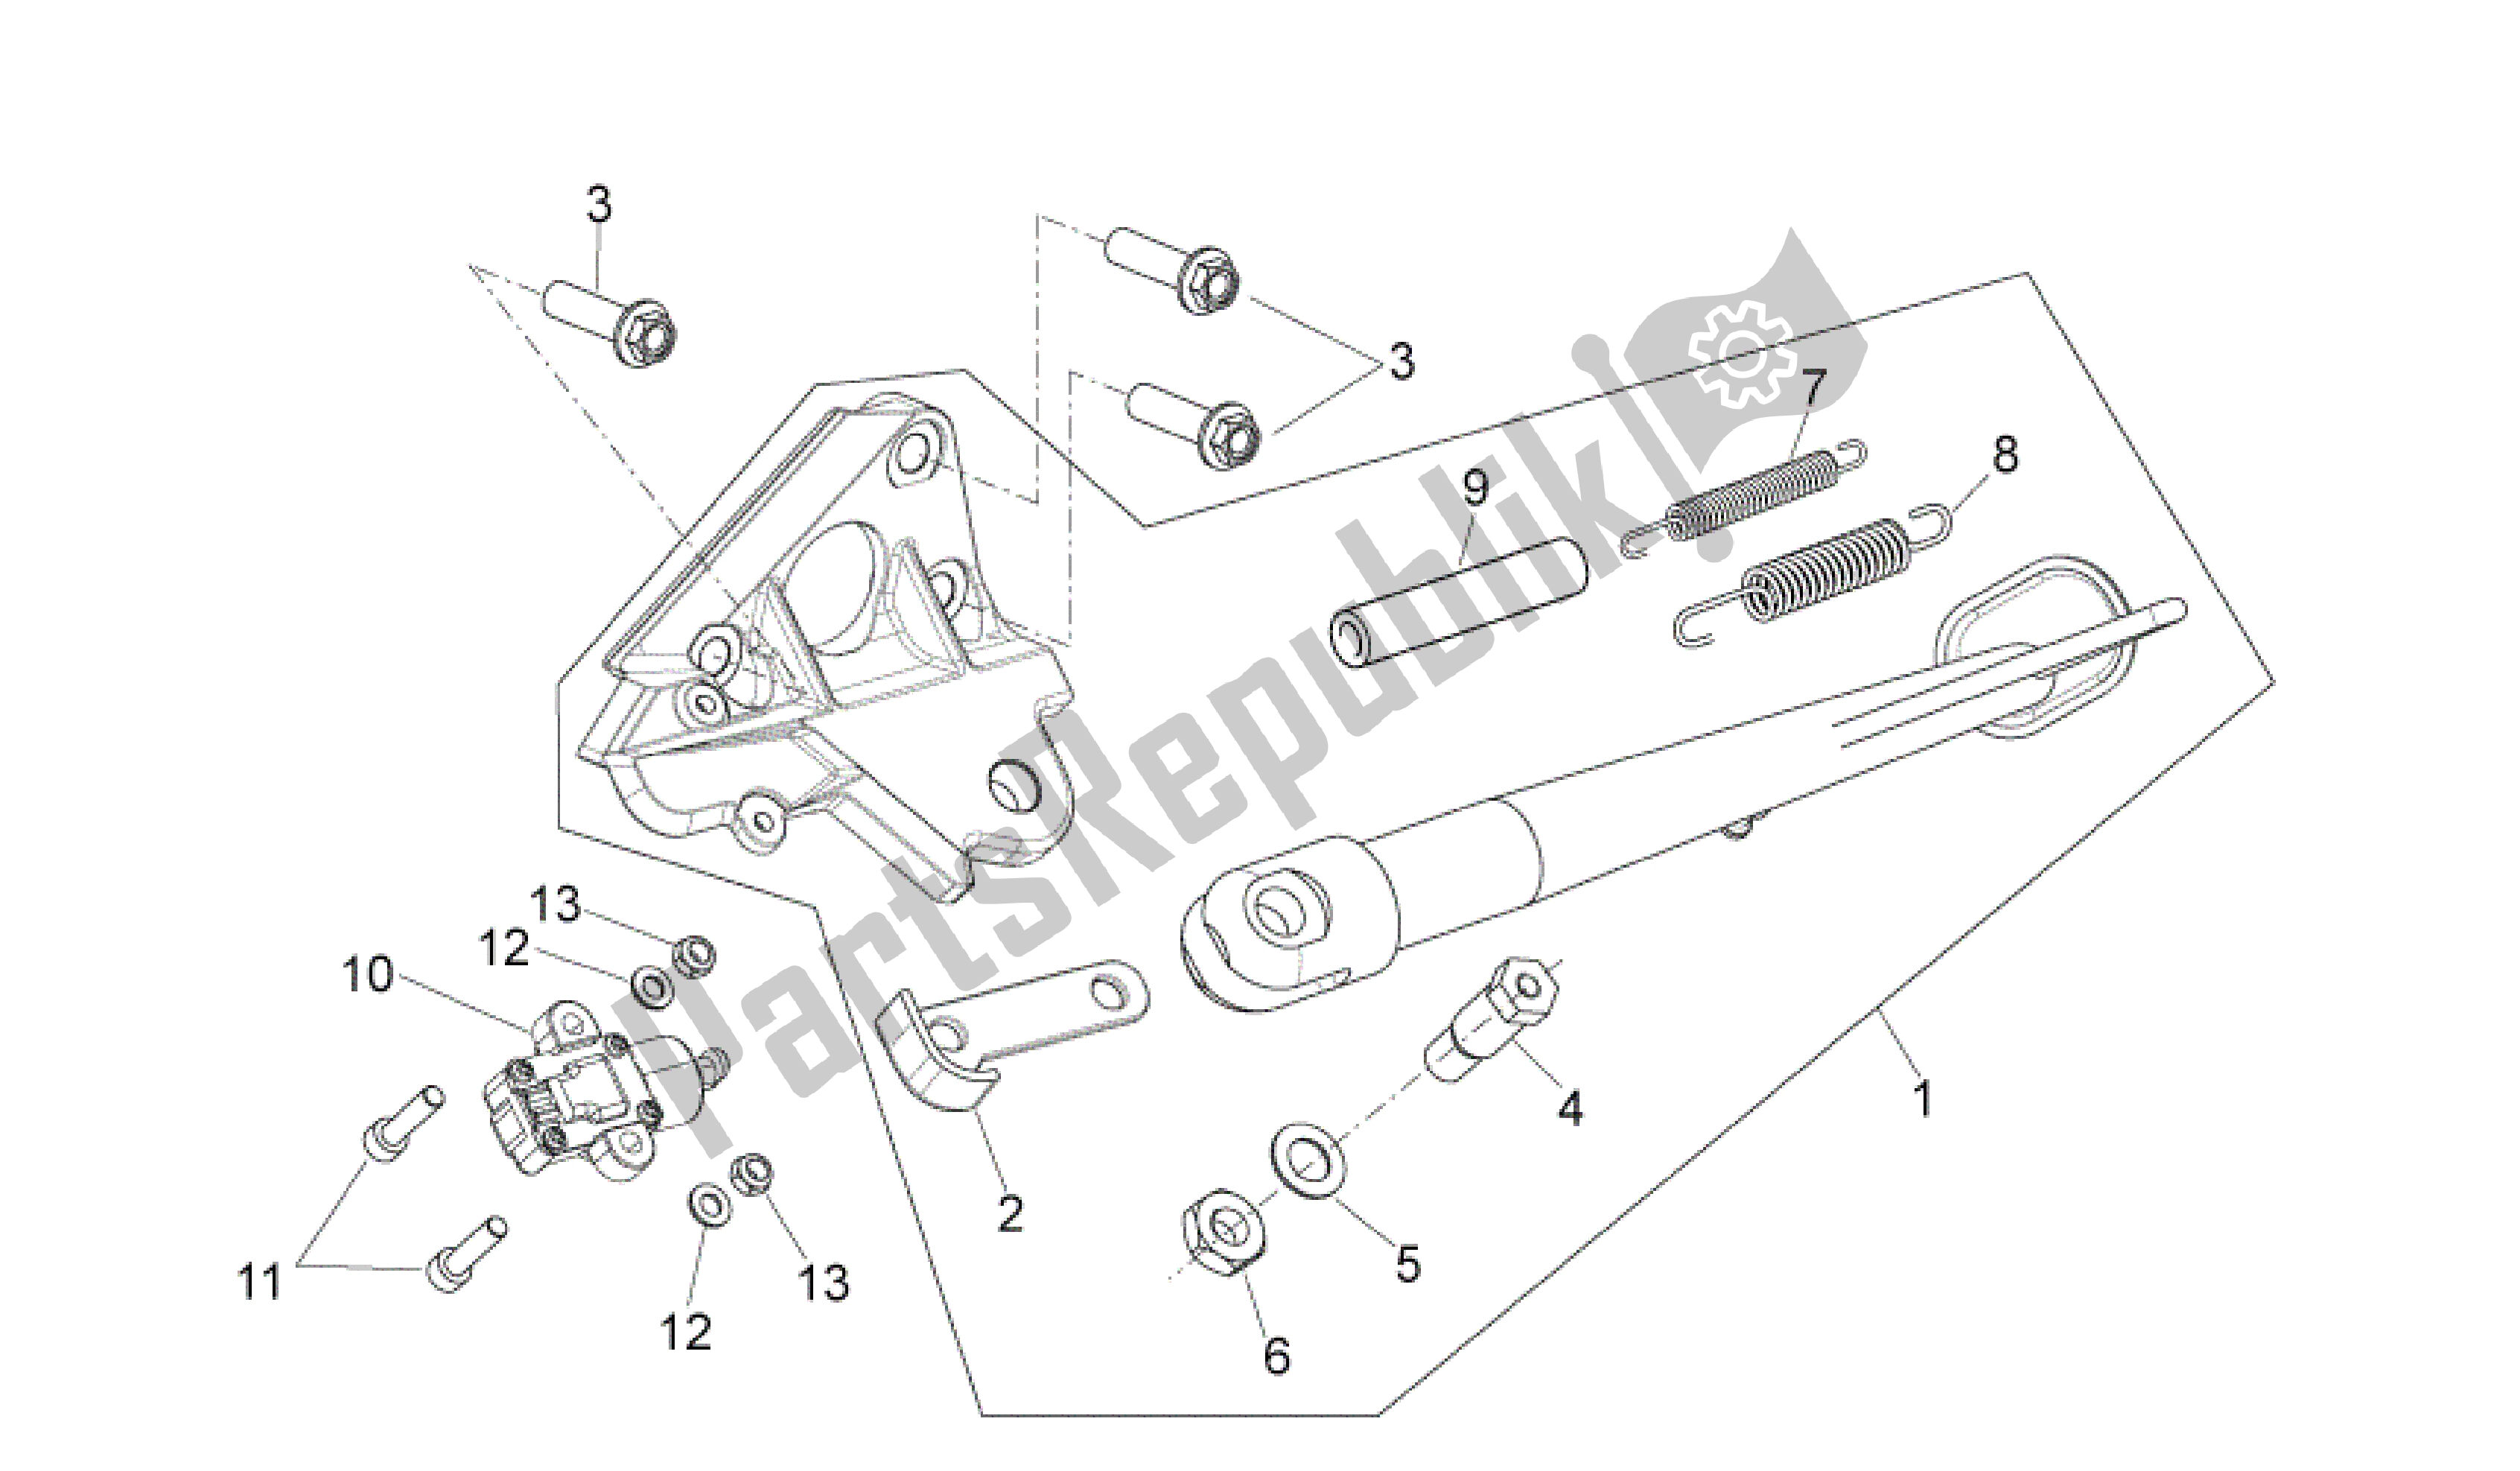 All parts for the Central Stand of the Aprilia Shiver 750 2010 - 2013